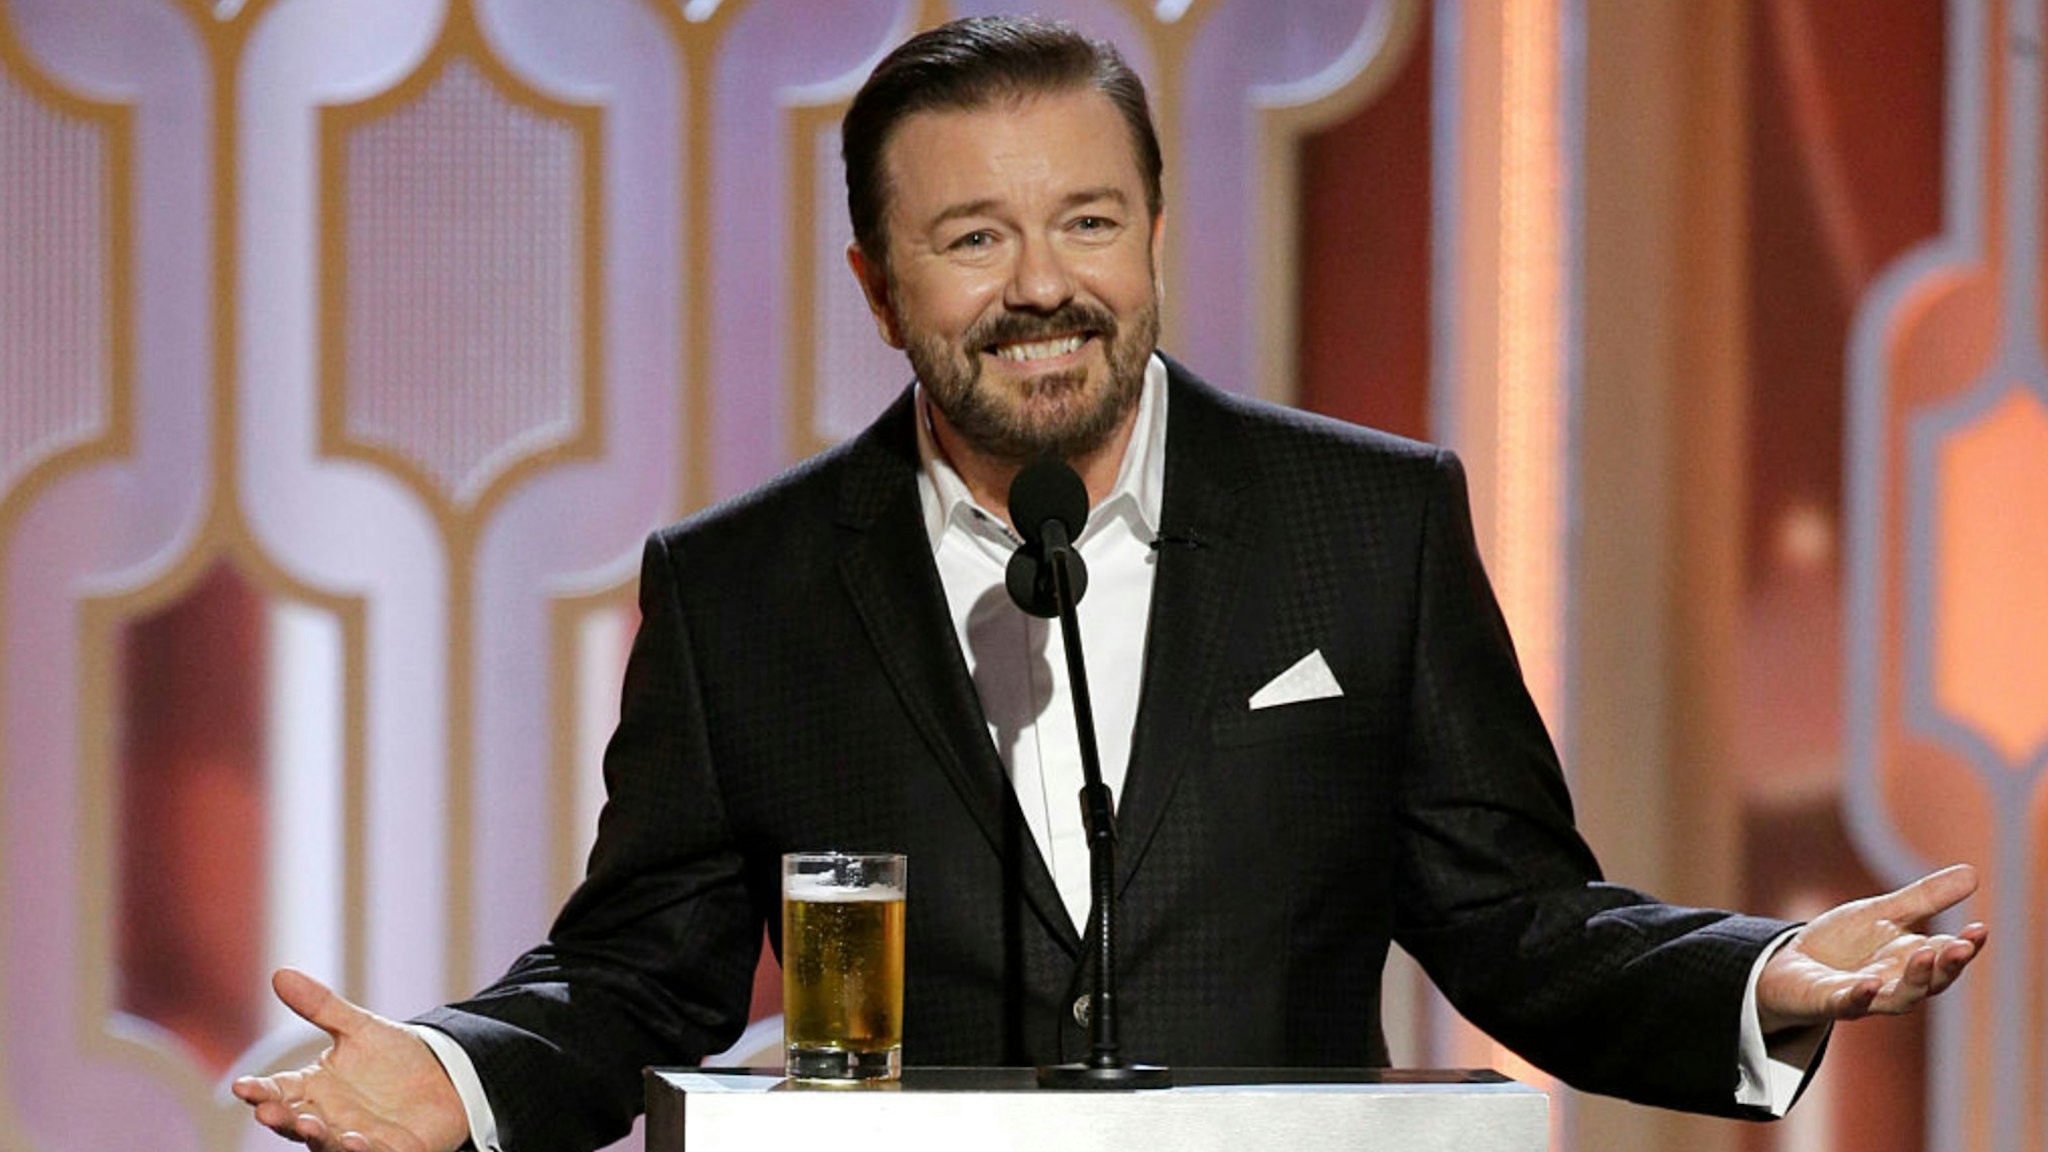 In this handout photo provided by NBCUniversal, Host Ricky Gervais speaks onstage during the 73rd Annual Golden Globe Awards at The Beverly Hilton Hotel on January 10, 2016 in Beverly Hills, California.